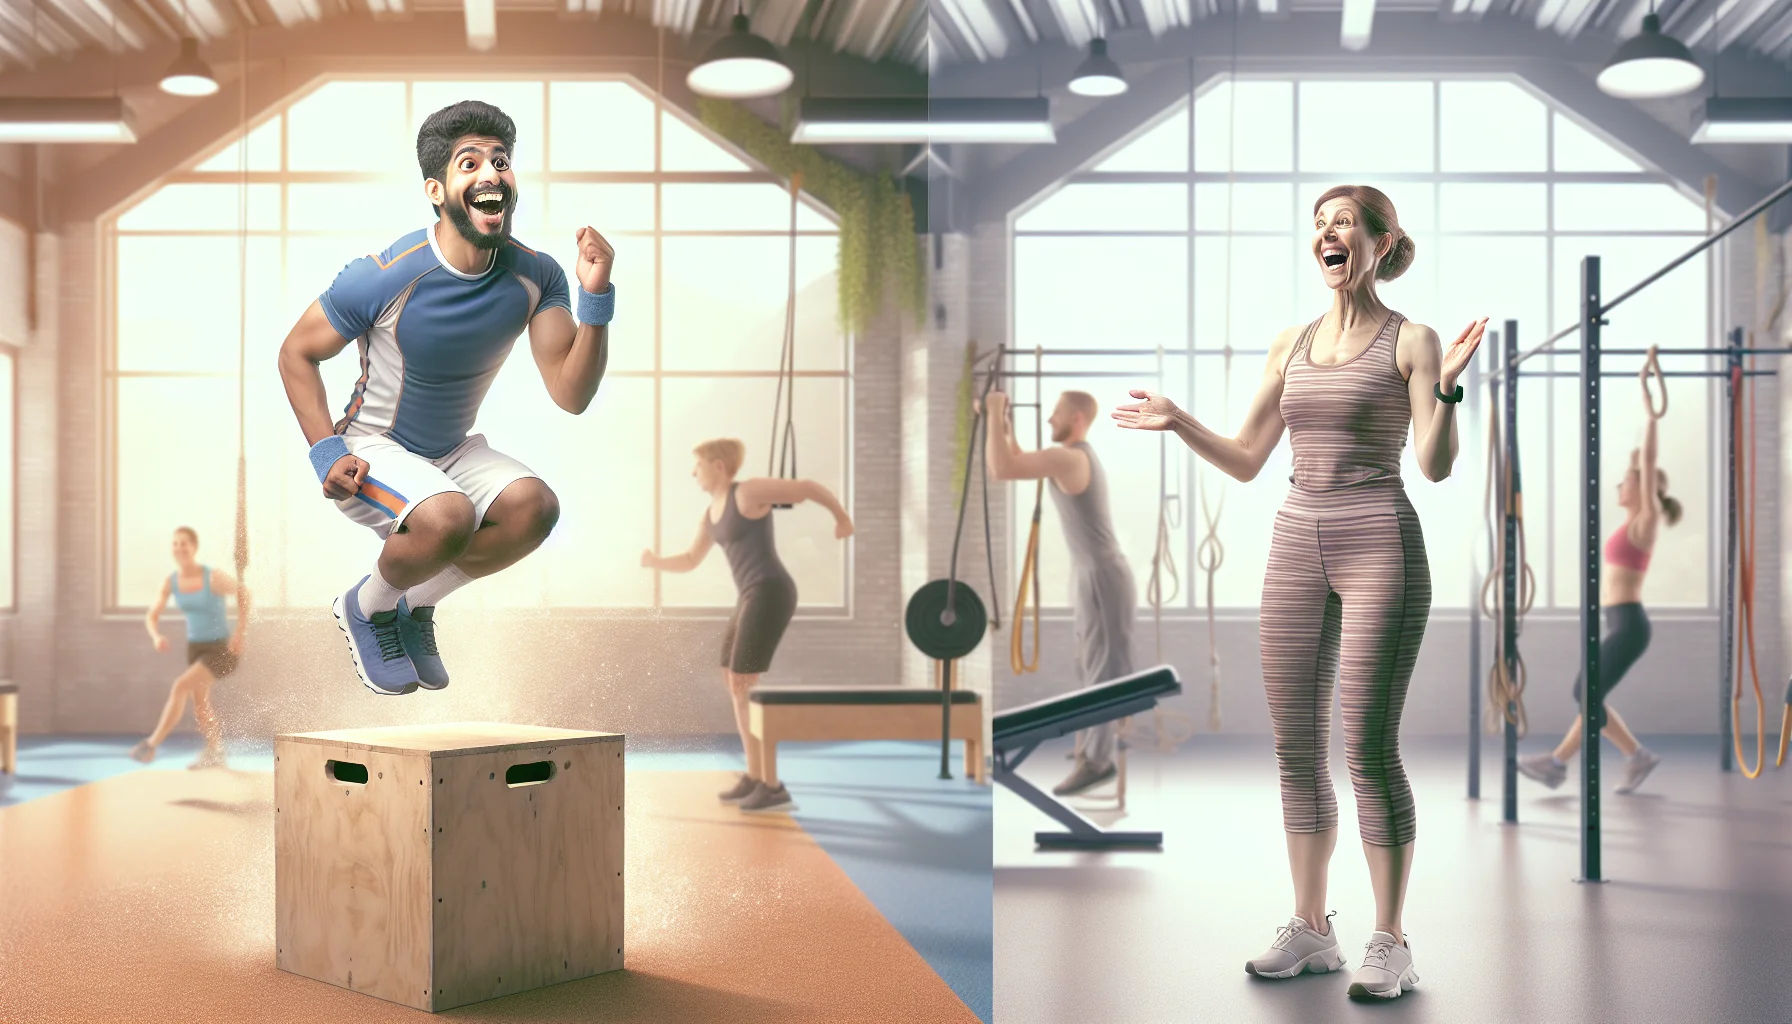 Create a humorous yet educational image setting in a gym that showcases the differences between plyometrics and calisthenics. On the left side, a jovial South Asian man in sports gear mid-way through a plyometric box jump, showing his determination and also a humorous look of surprise on his face. On the right side, a Caucasian female fitness instructor demonstrating a calisthenics exercise, possibly a pull-up, with an exaggerated joyful smile, cheerfully encouraging those around her to try. Incorporate pastel colours and light, spacious environment/background to make the scene appealing and encouraging to spectators, promoting the joy and benefits of exercise.